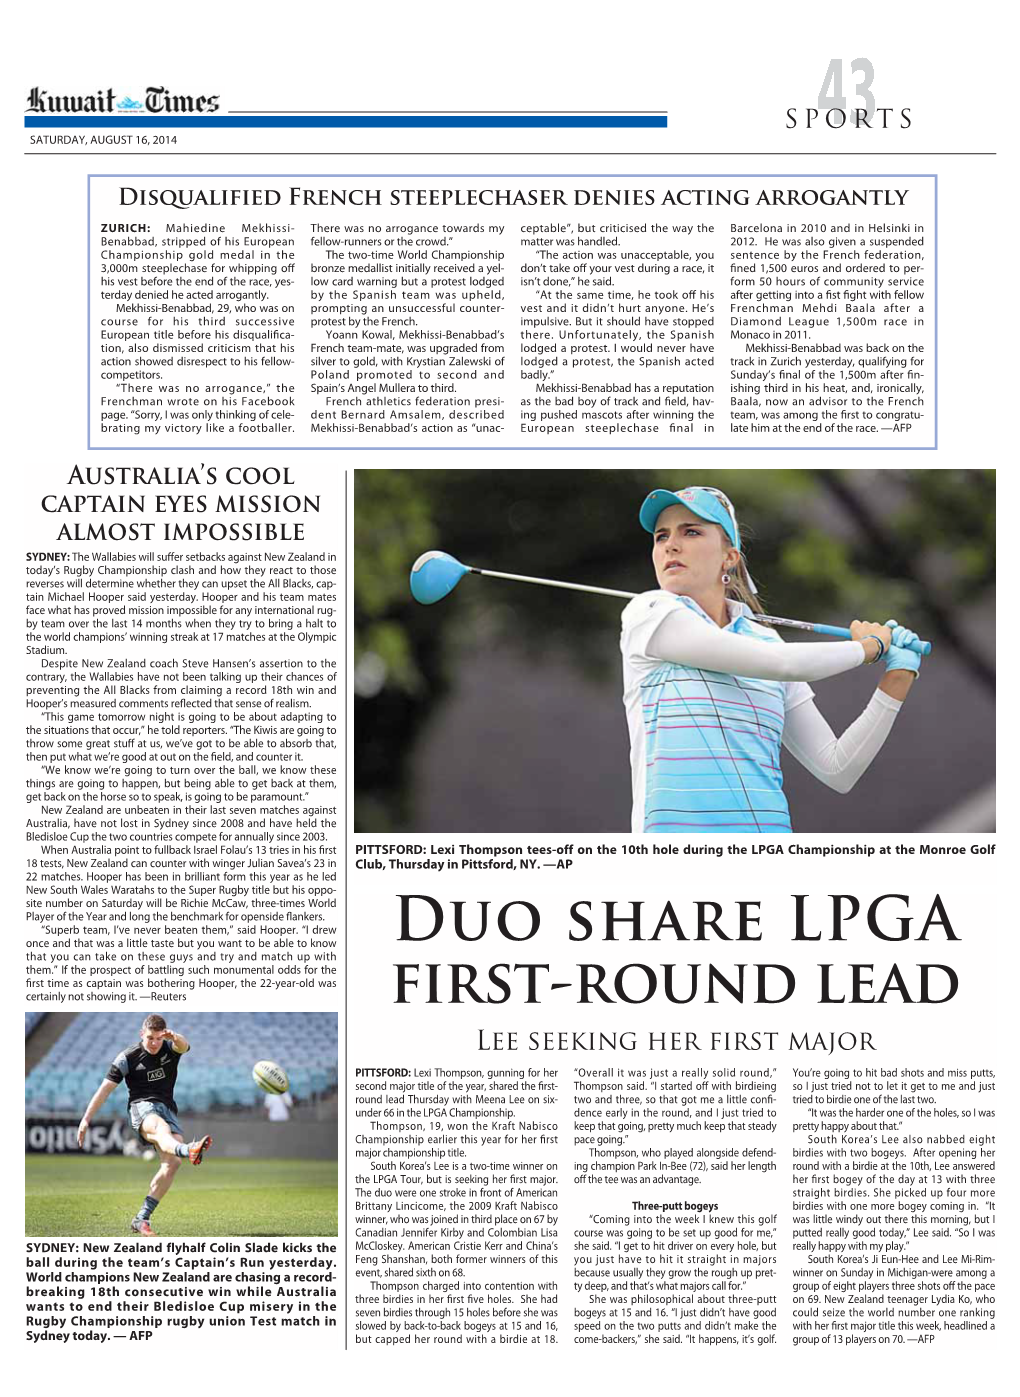 DUO Share LPGA First-Round Lead